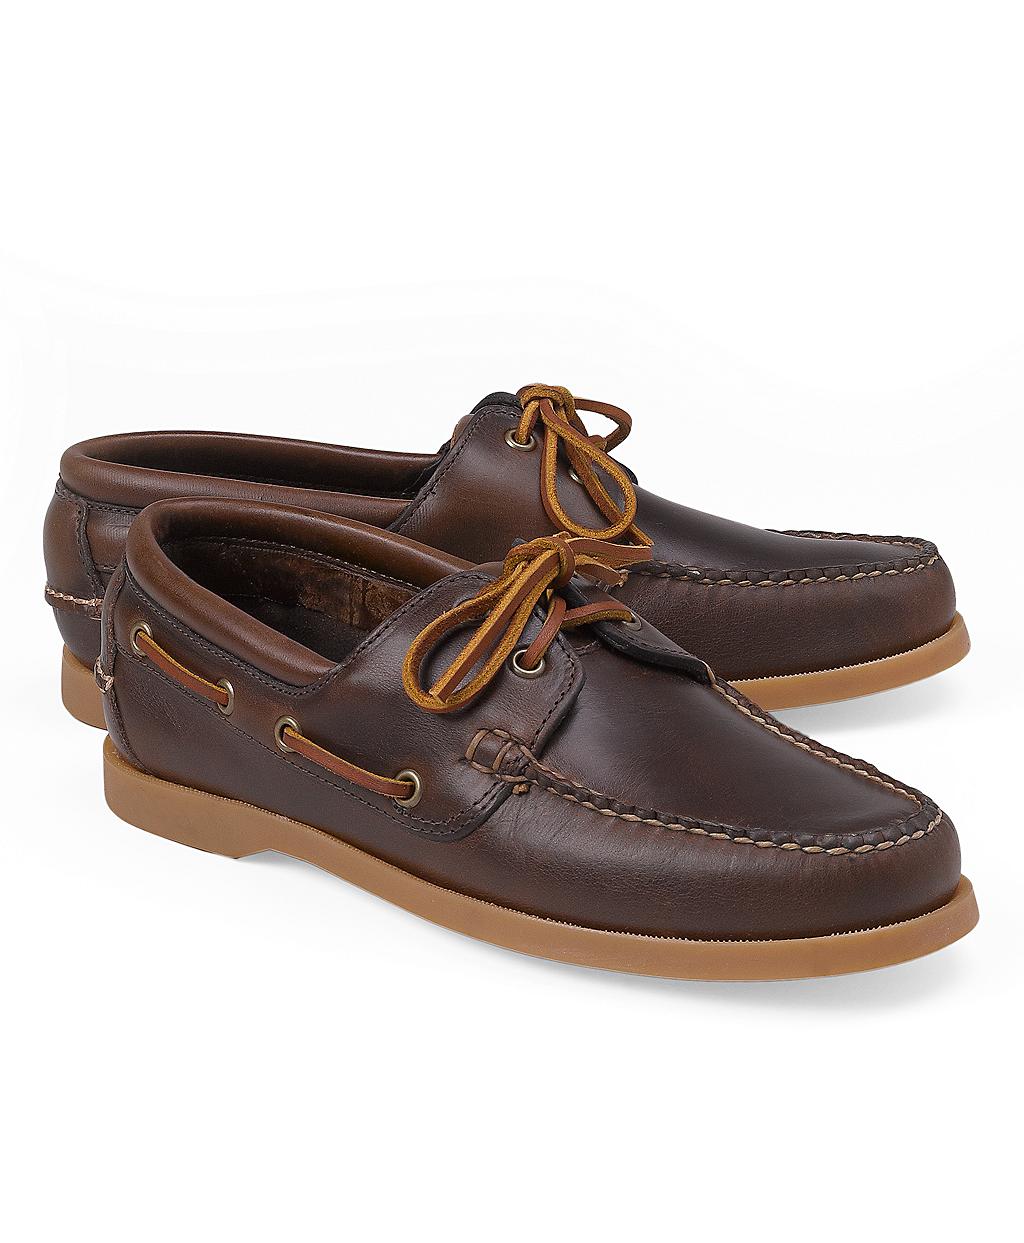 Brooks Brothers Leather Boat Shoes in Dark Brown (Brown) for Men - Lyst